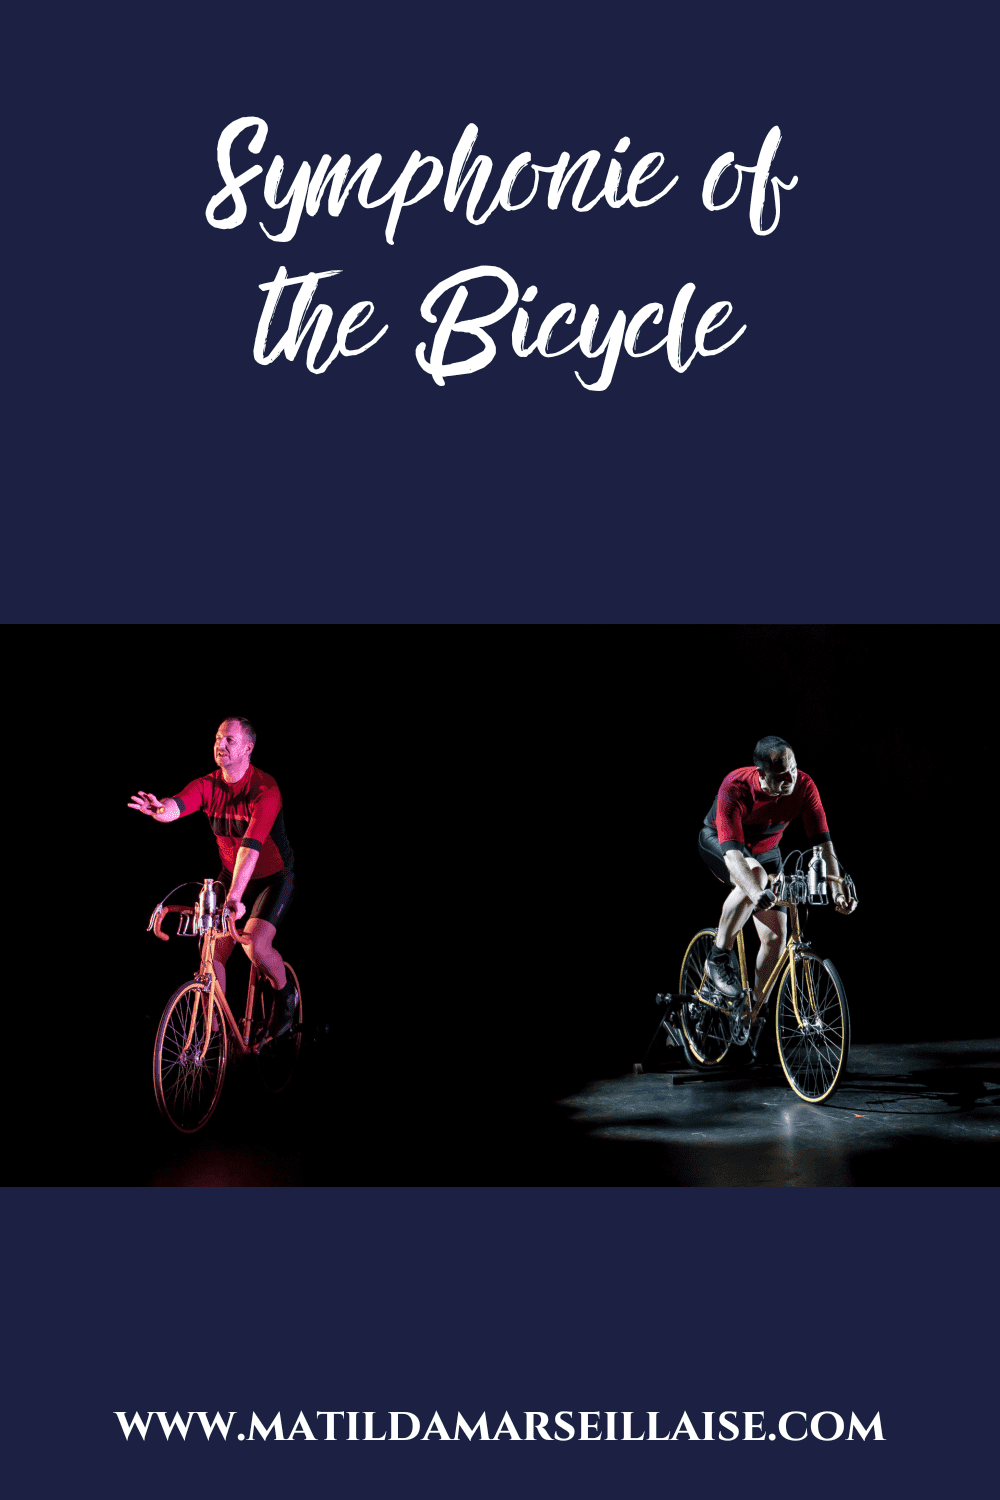 Symphonie of the Bicycle returns to Adelaide in May